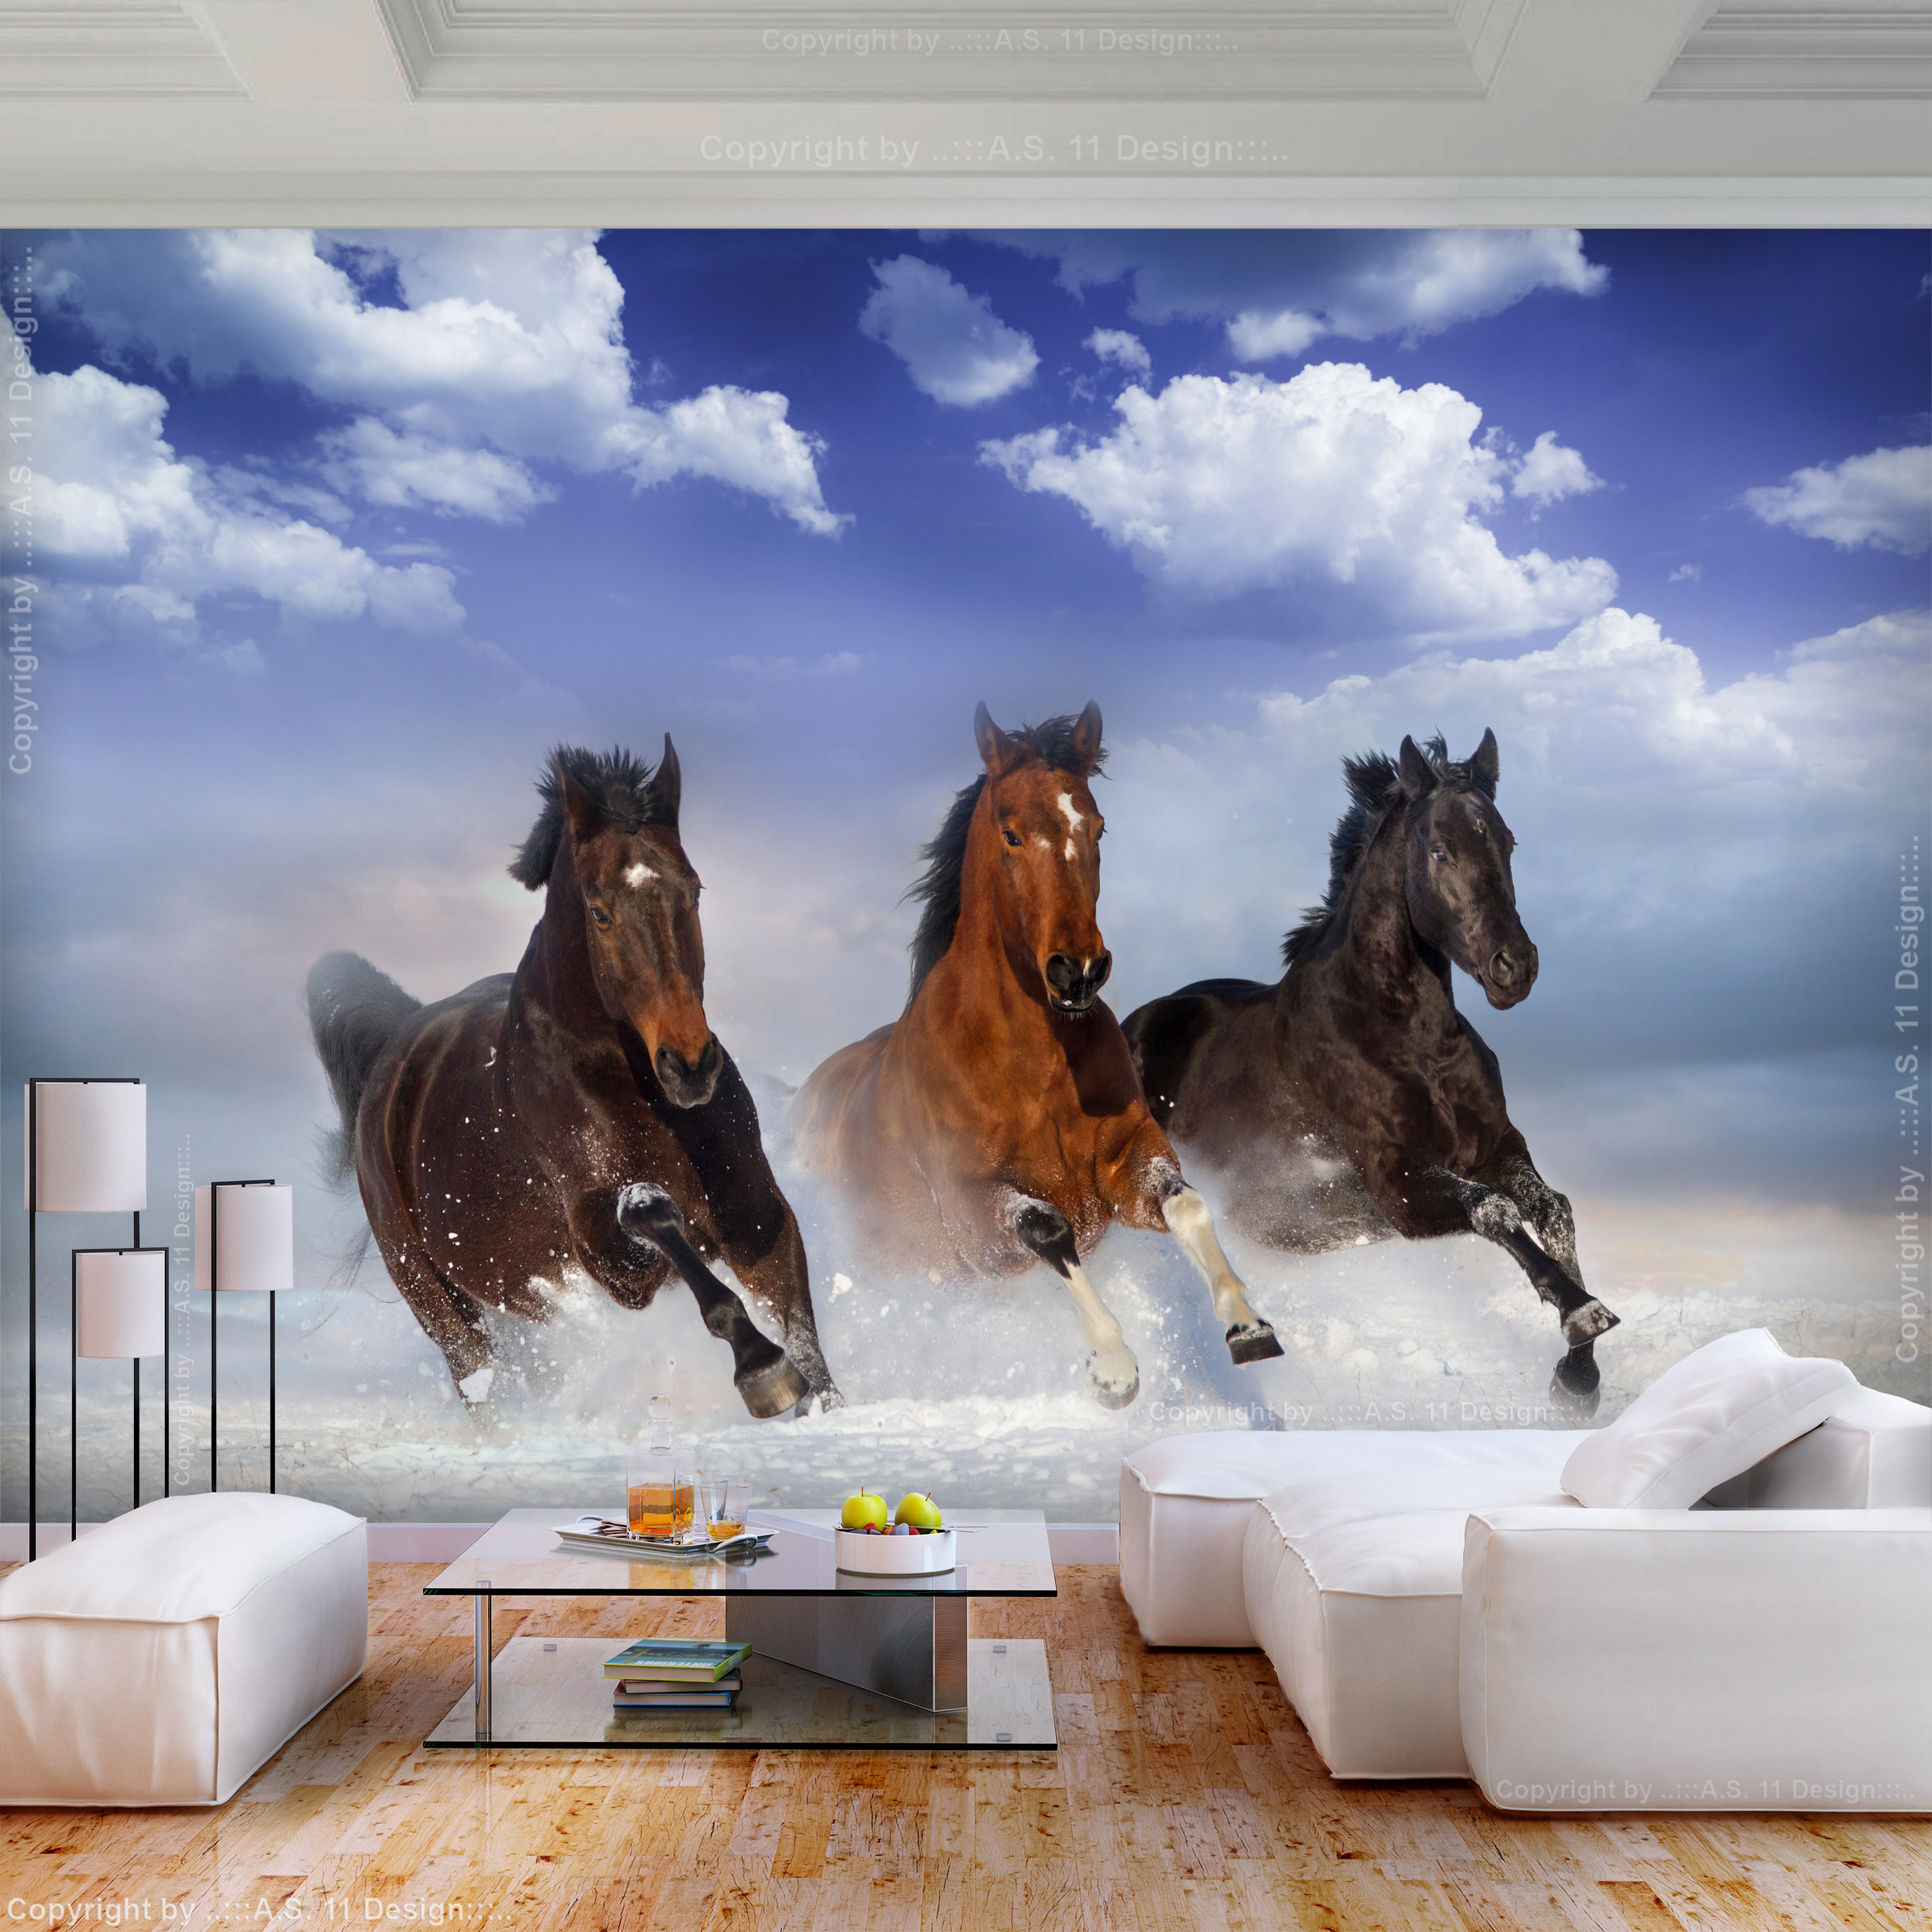 Self-adhesive Wallpaper - Horses in the Snow - 392x280